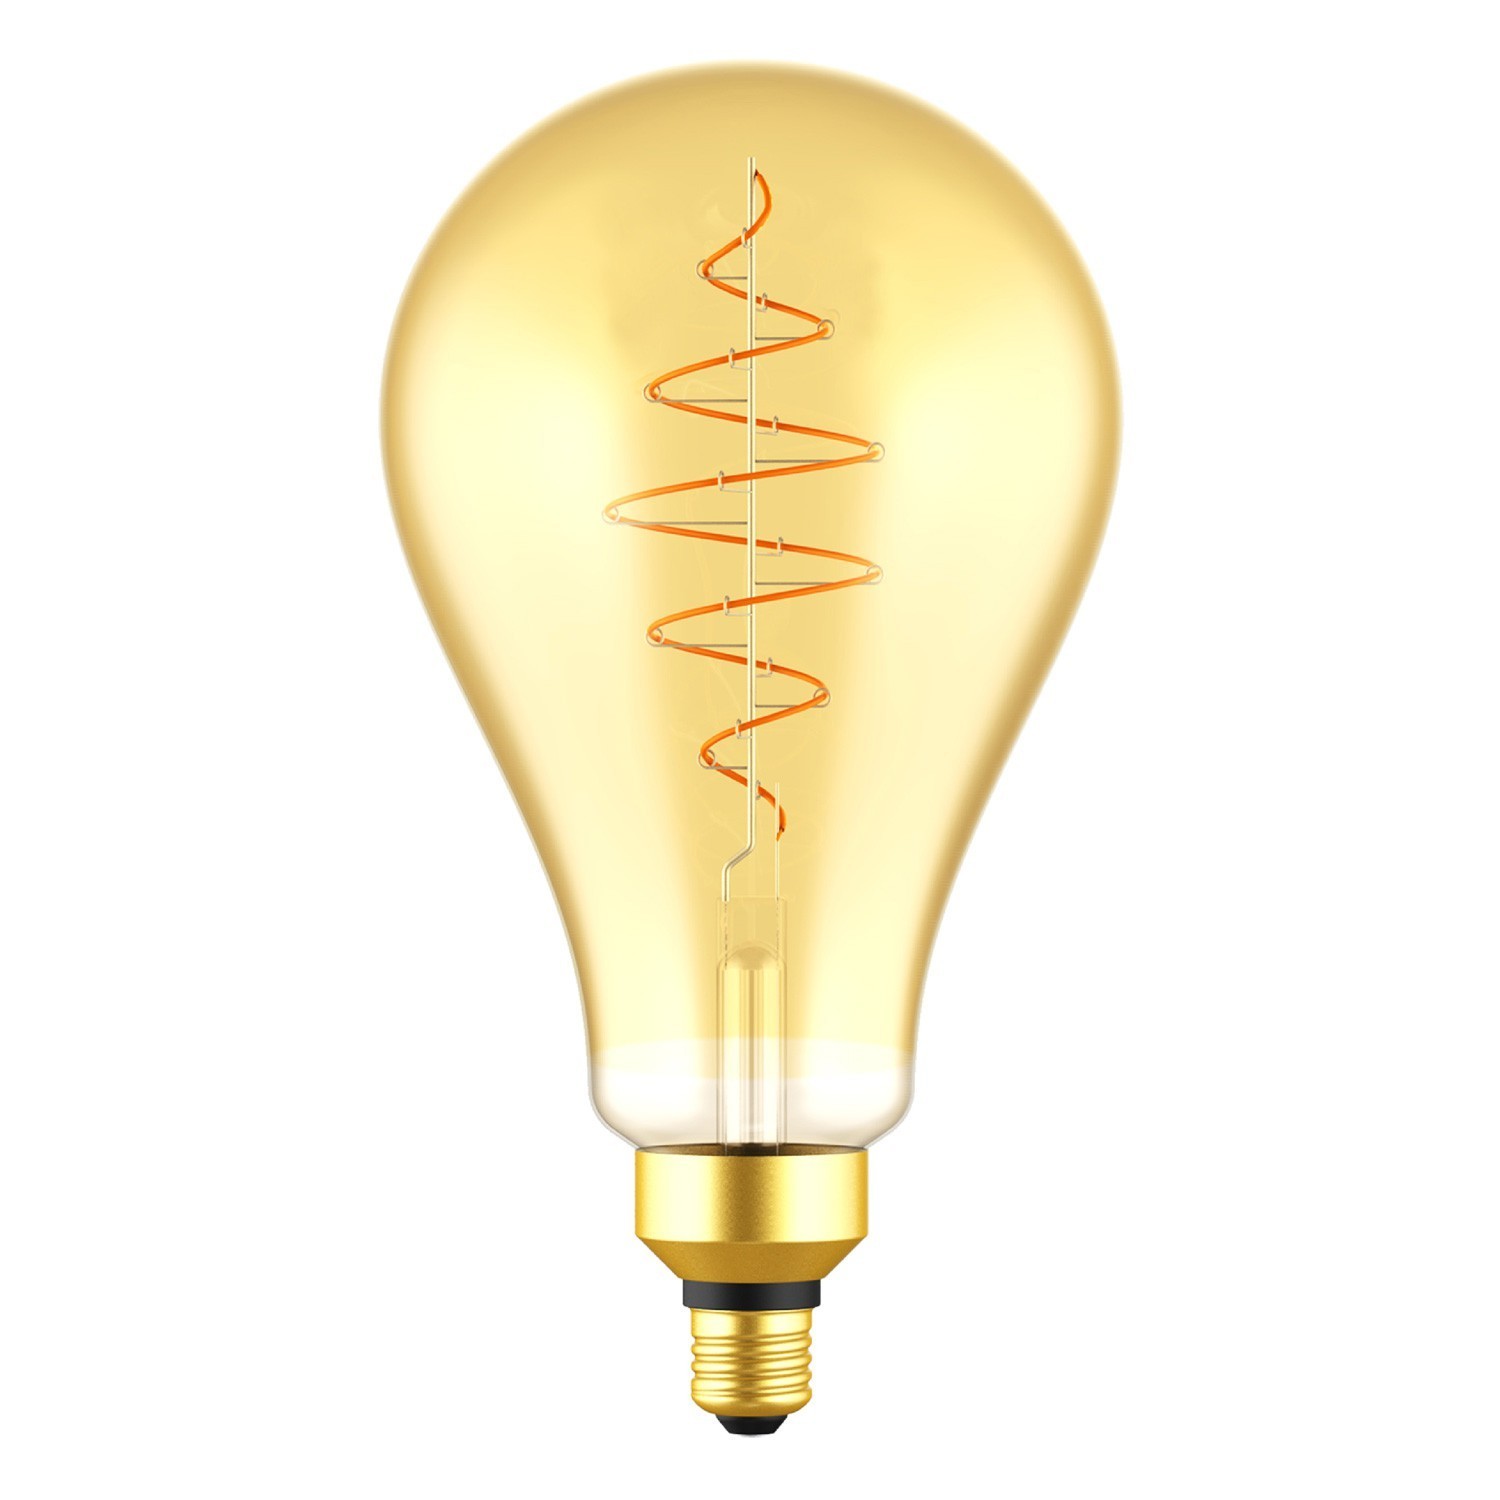 LED XXL Light Bulb Pear A160 Golden Croissant Line with Spiral Filament 7W 600Lm E27 2200K Dimmable